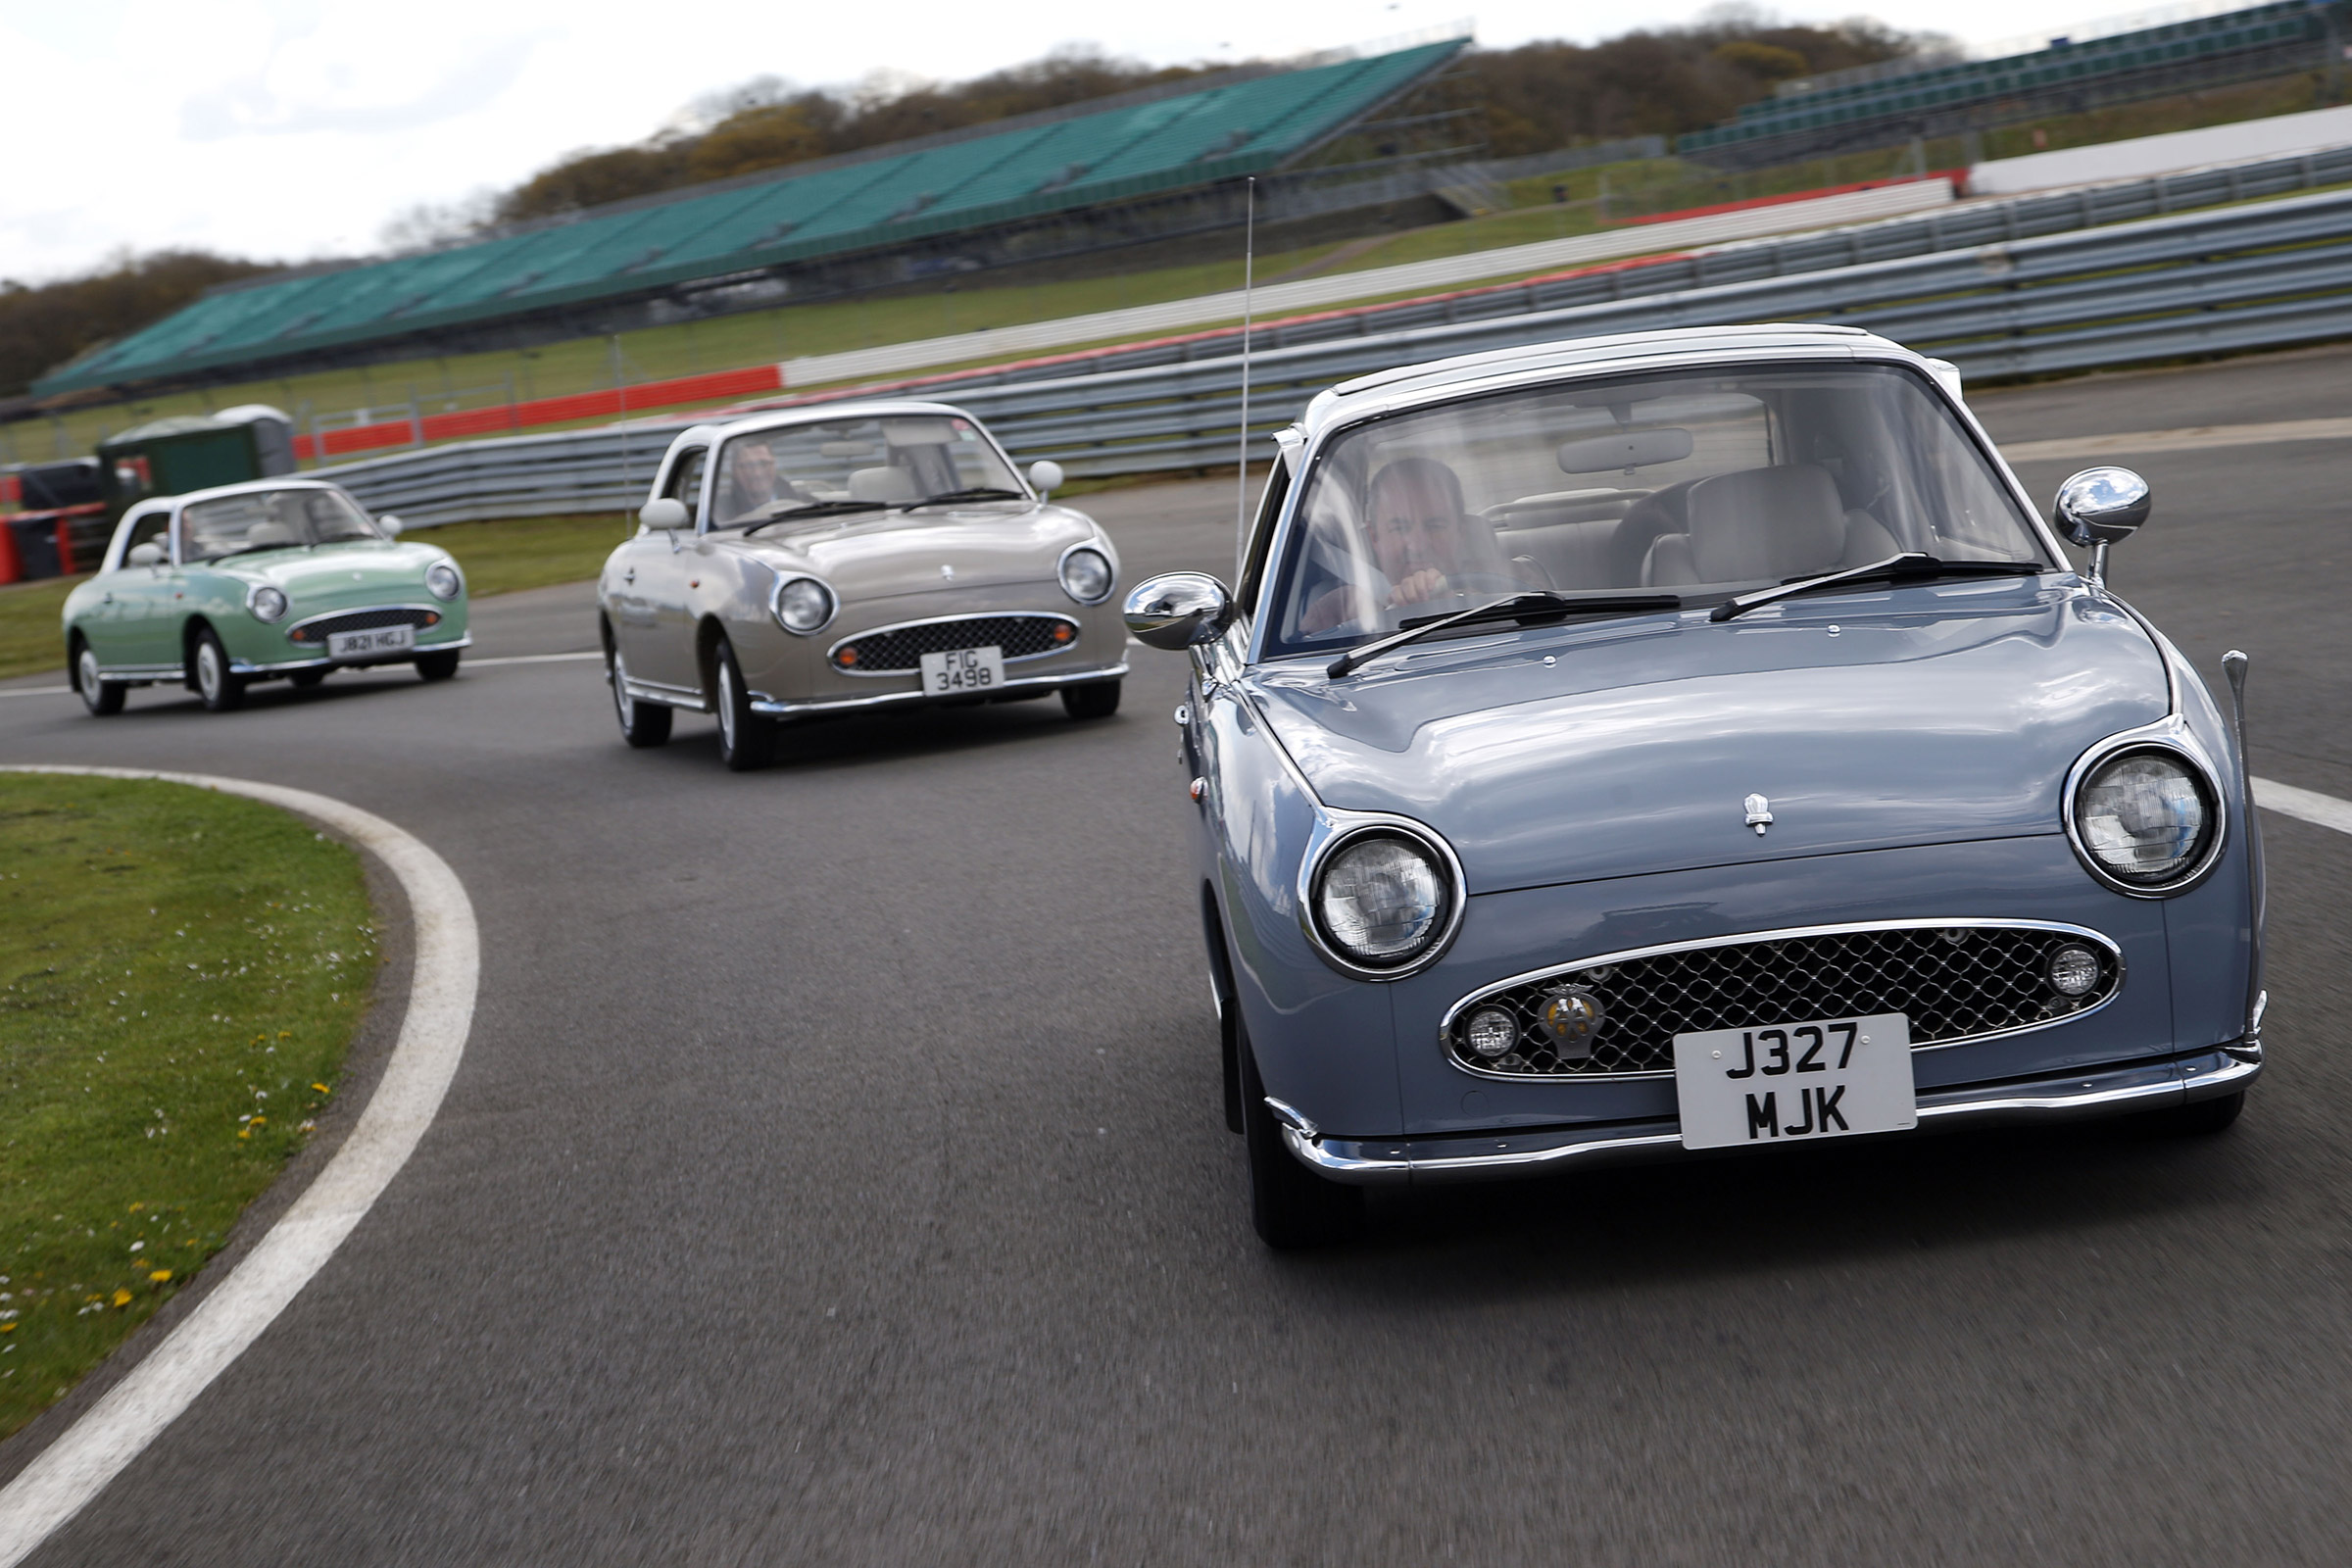 Cult classic: celebrating 25 years of the Nissan Figaro | Auto Express